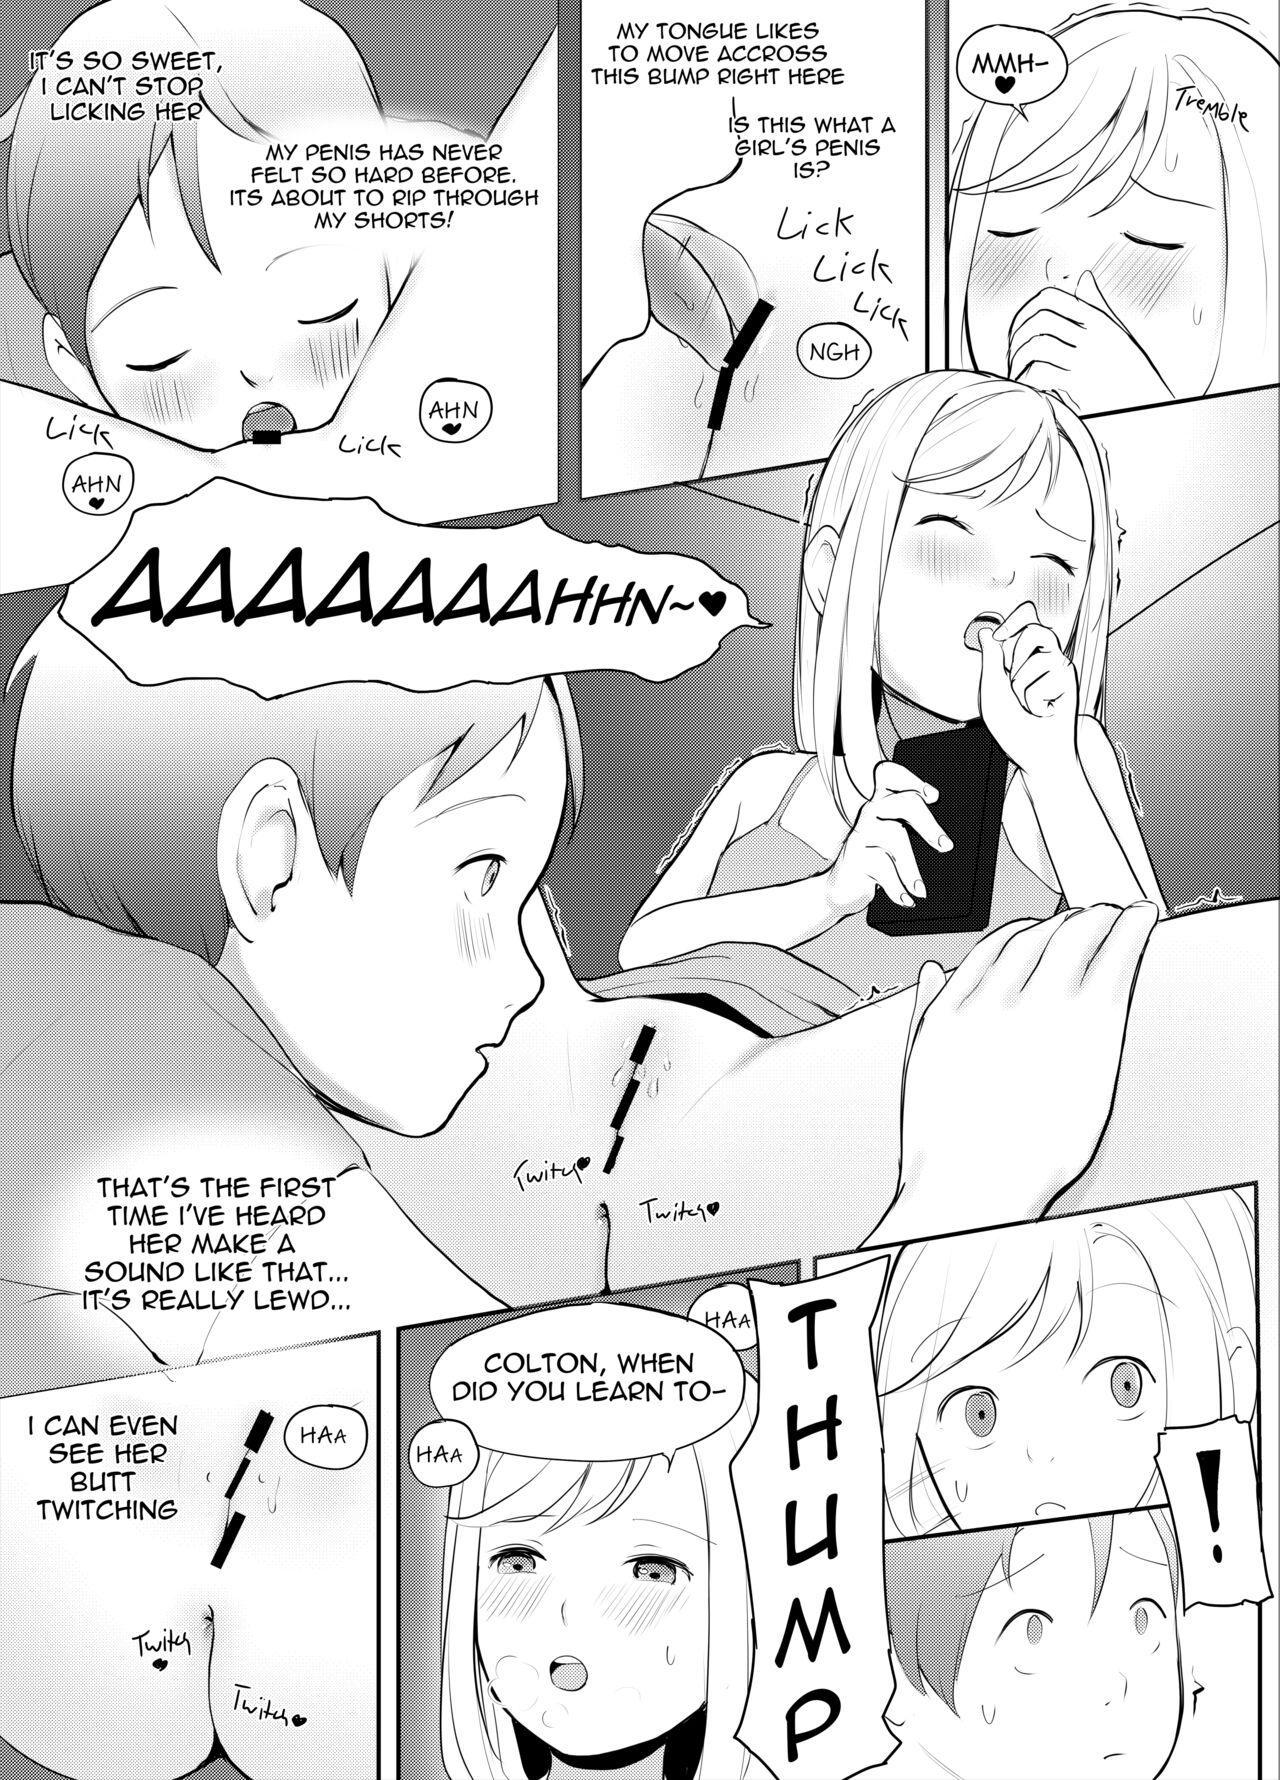 Shorts Passing the Time - Original Best Blow Jobs Ever - Page 7